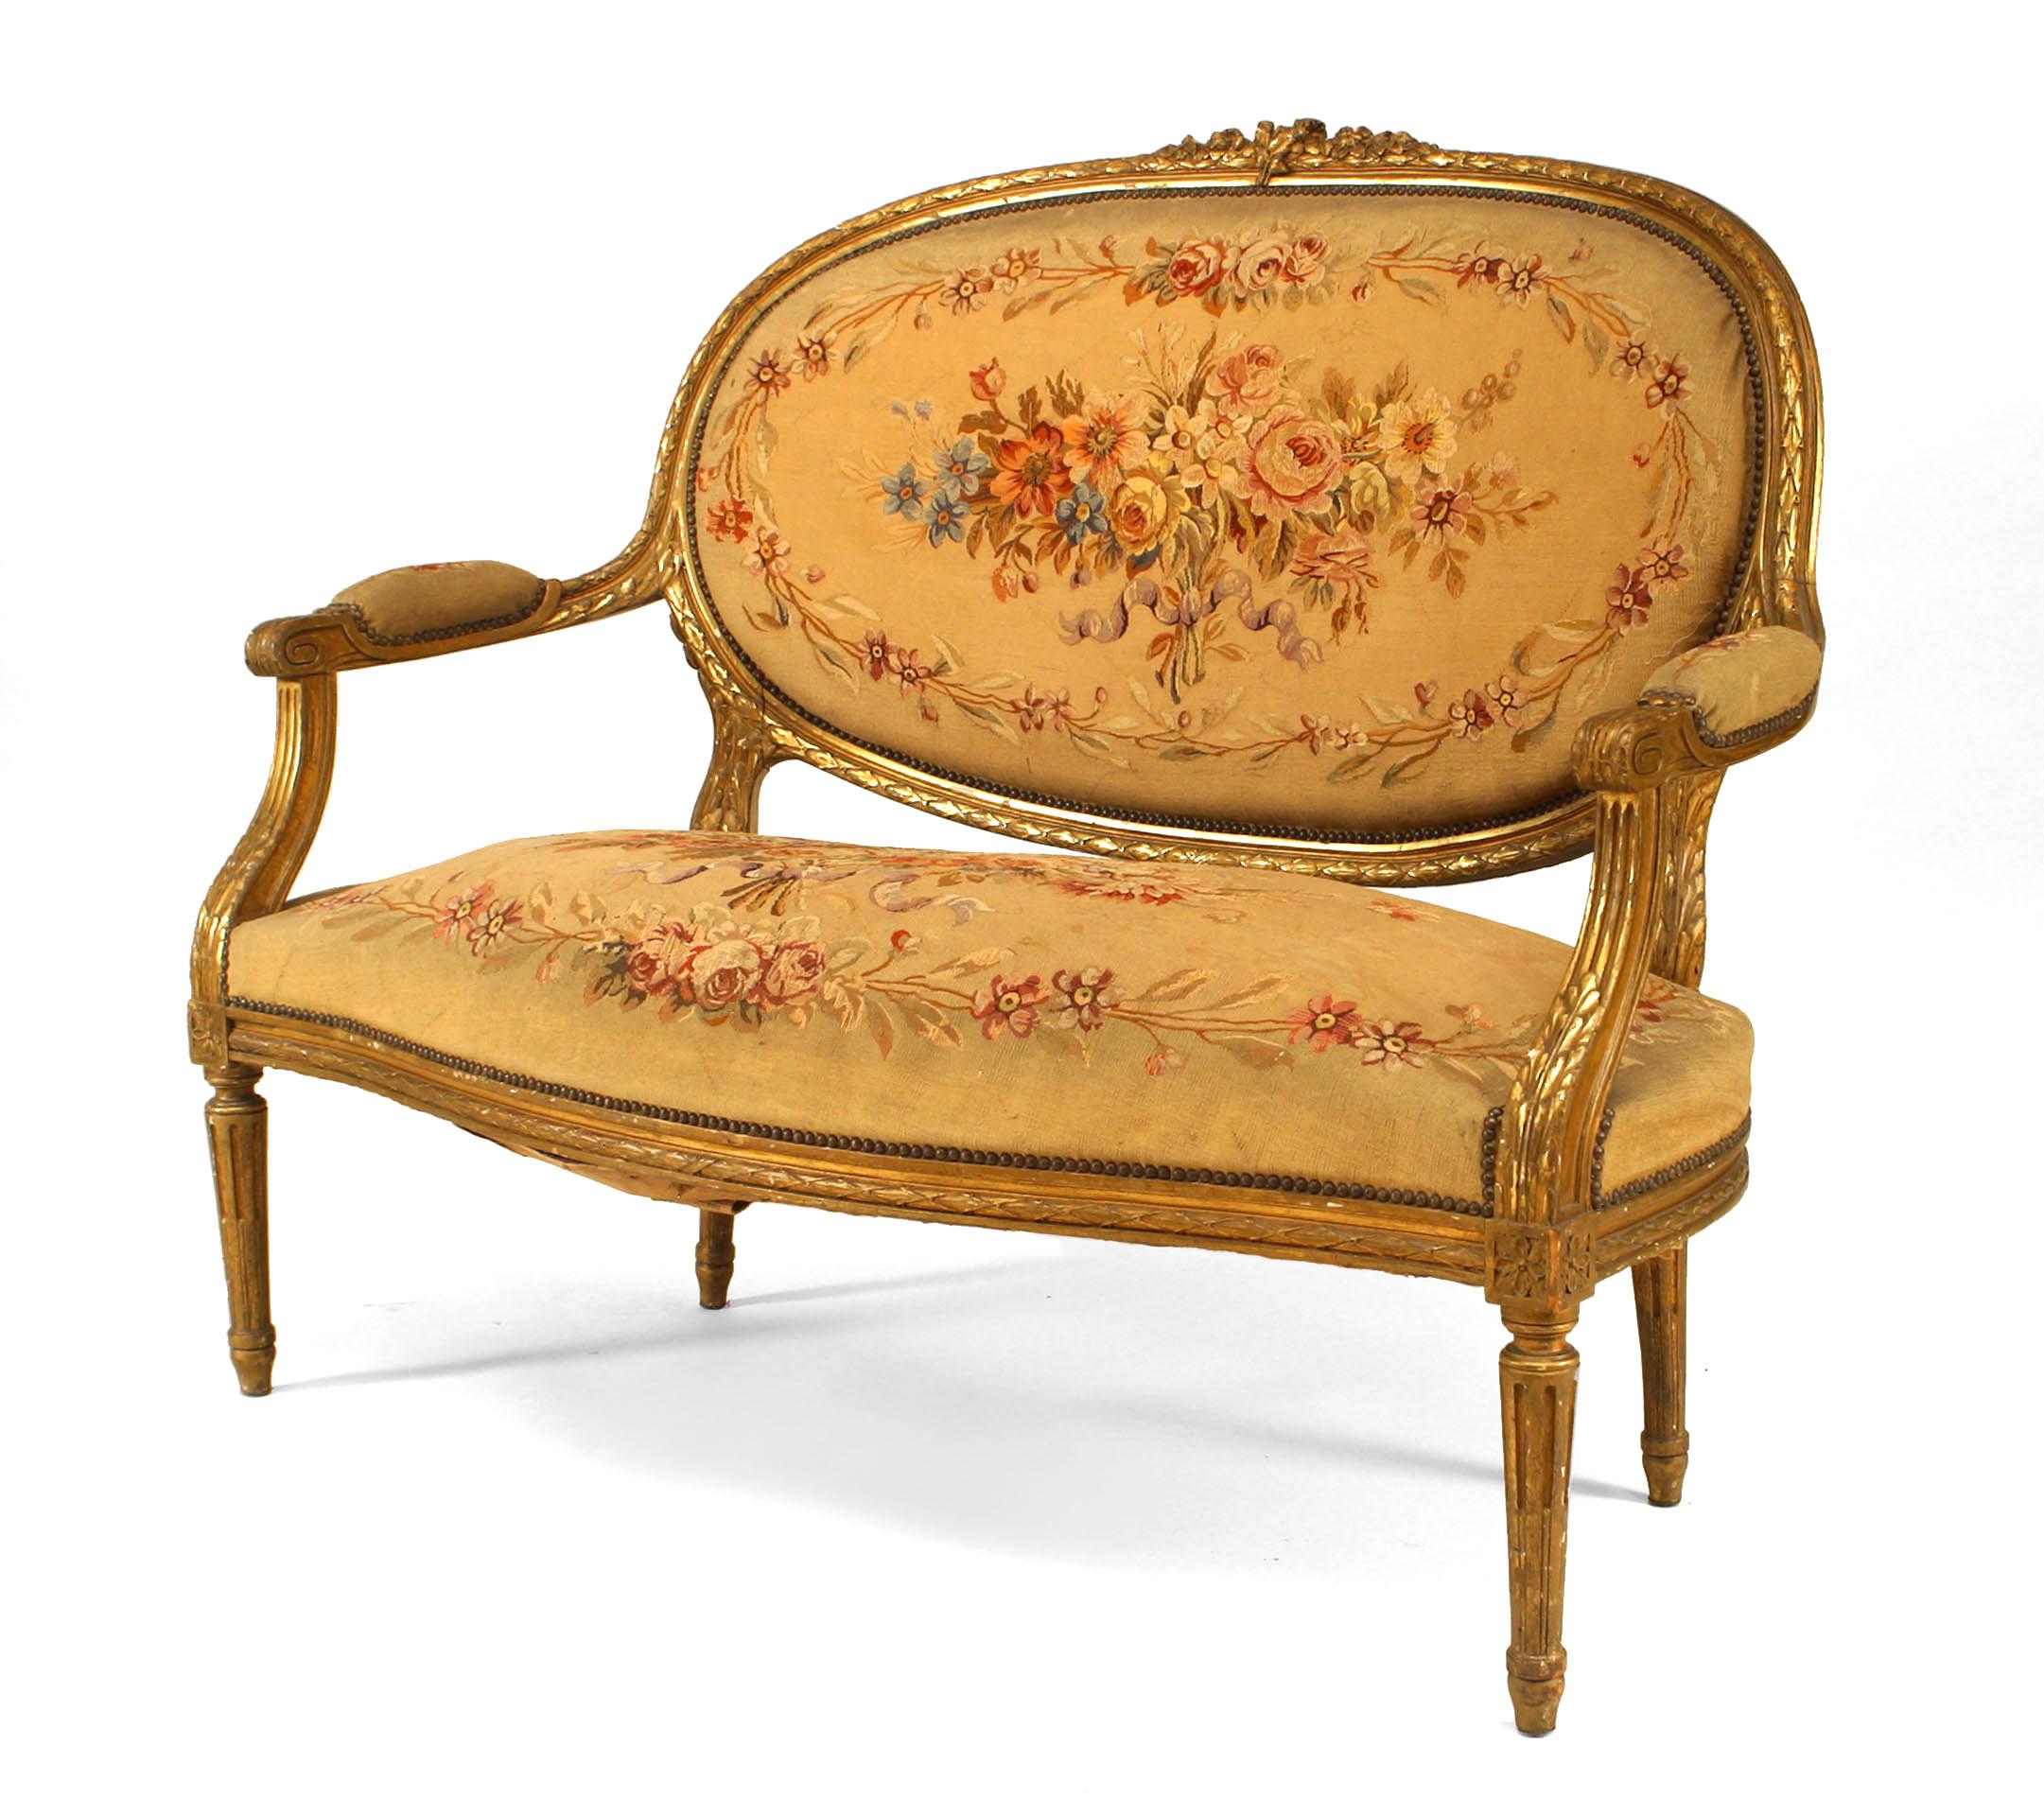 French Louis XVI-style, 19th century gilt oval back Aubusson upholstered loveseat.
  